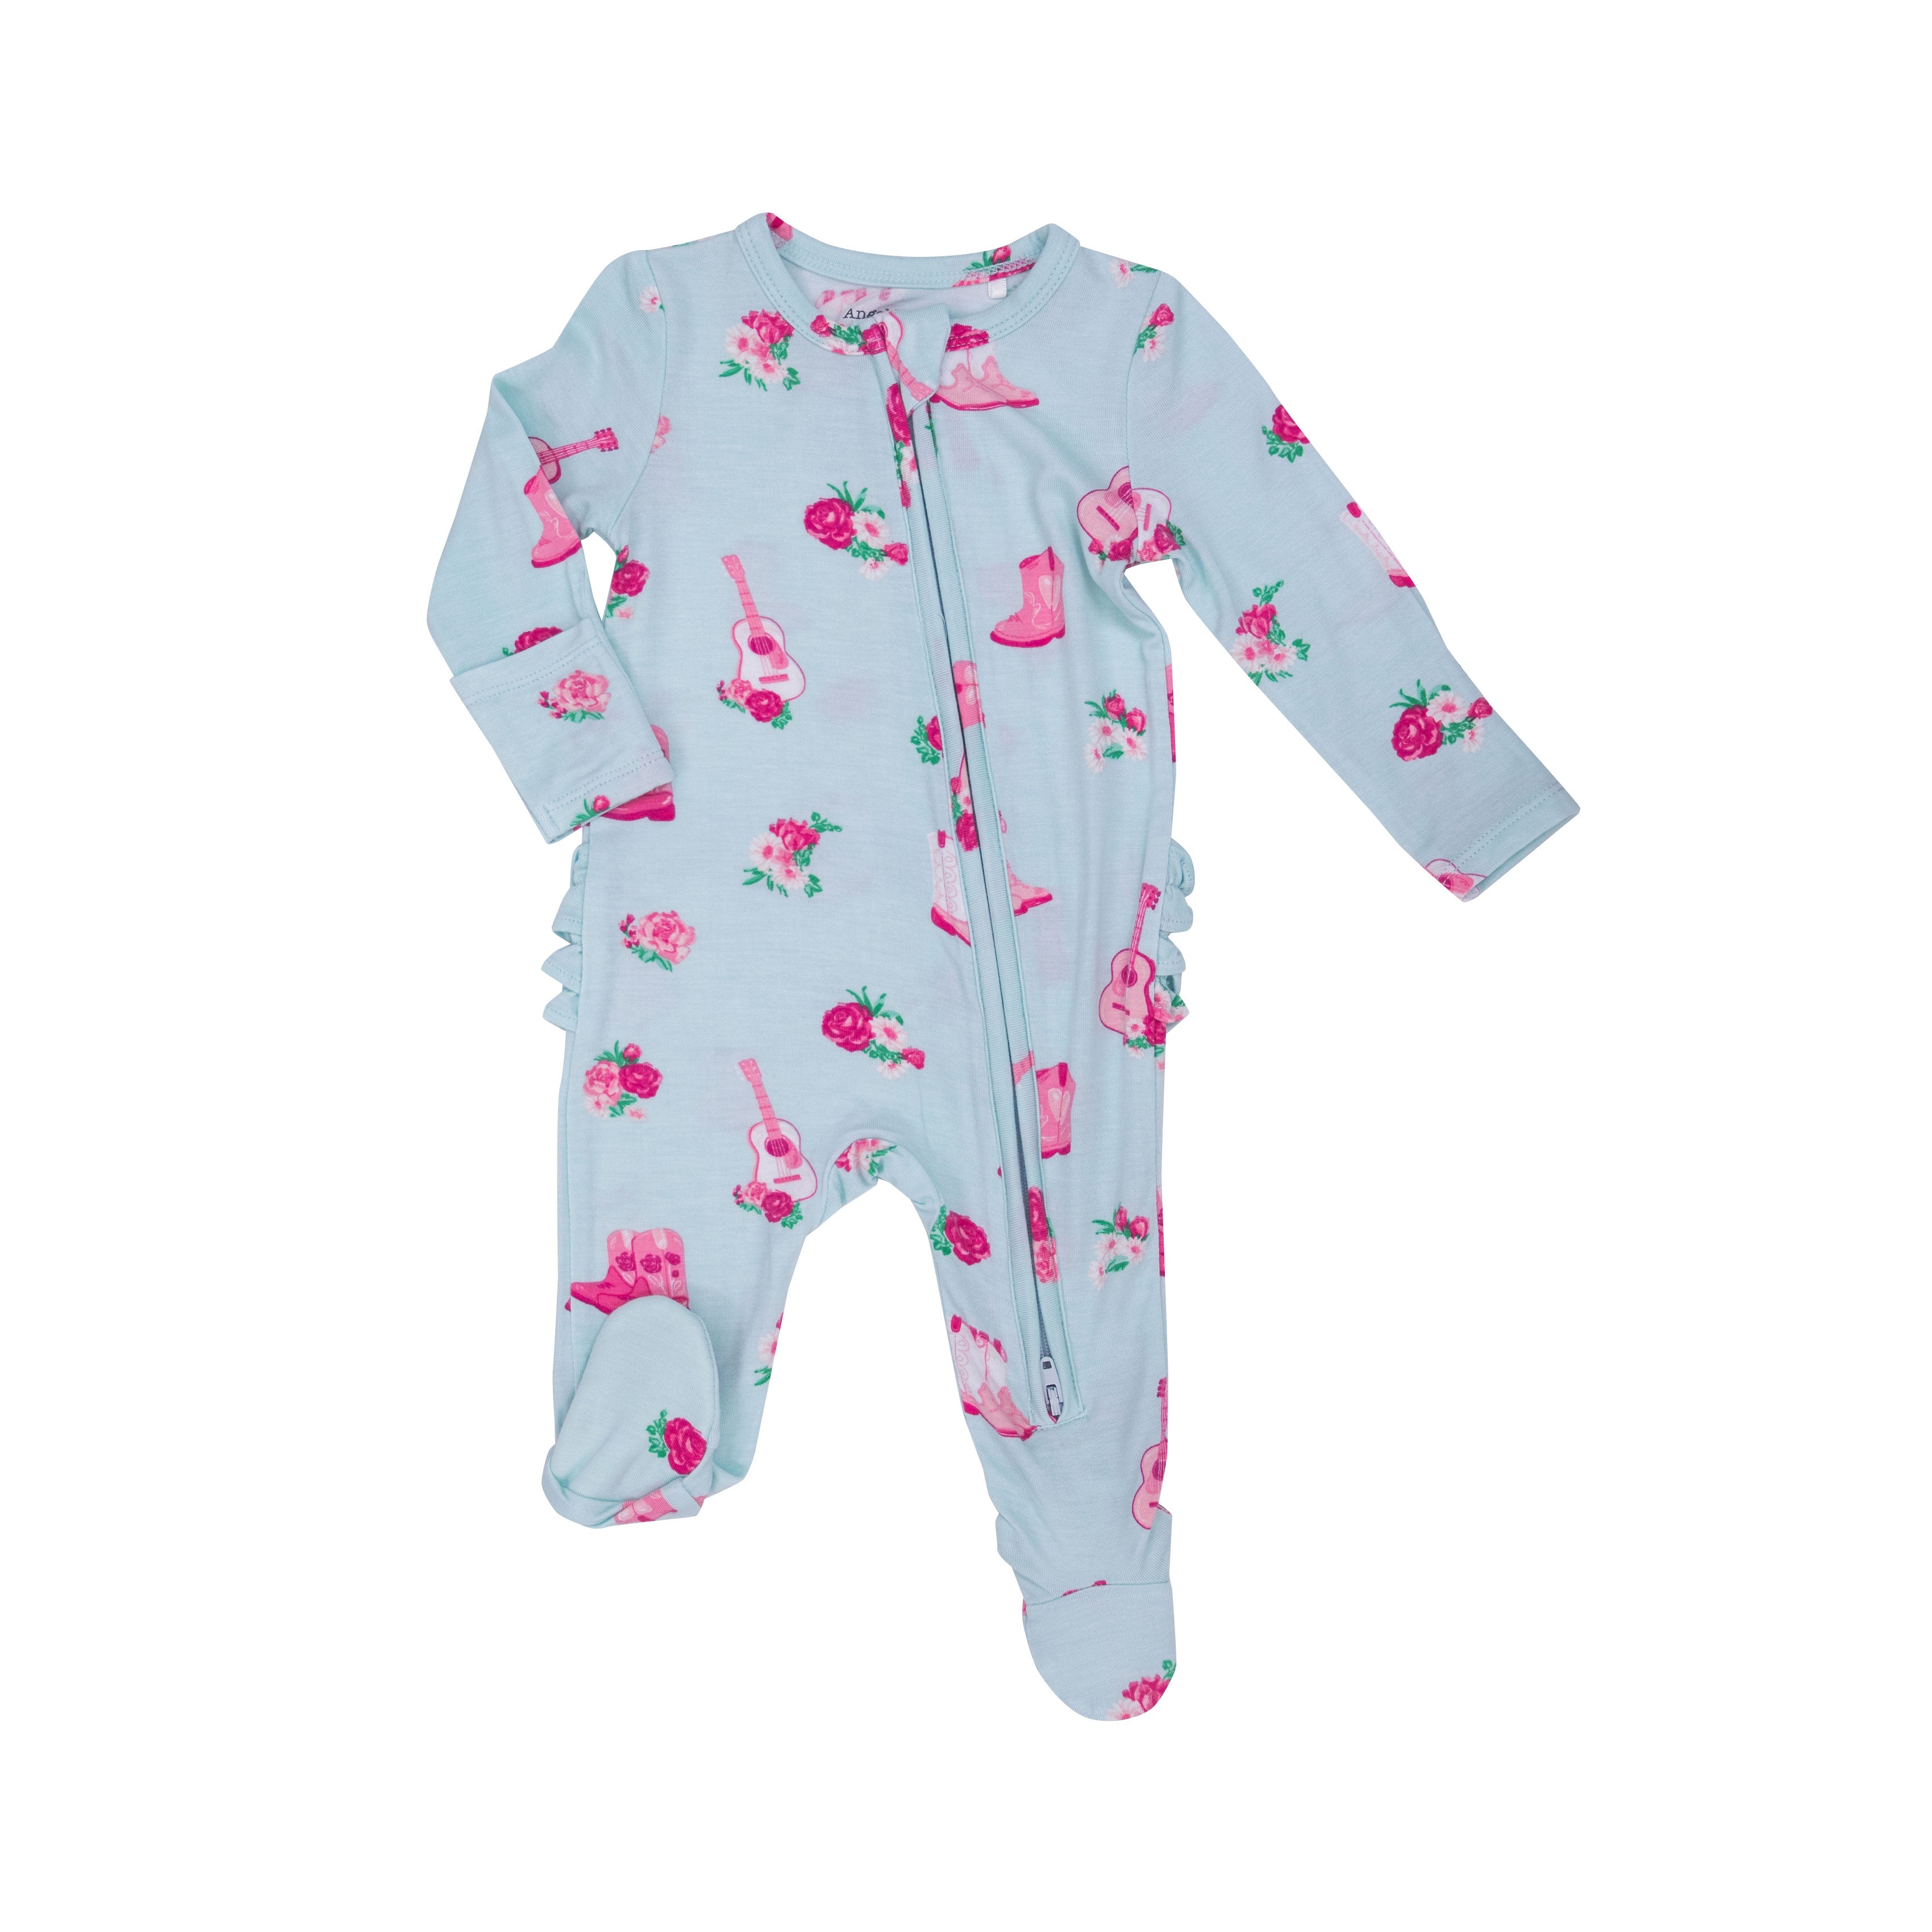 blue zipper footie with pink fancy cowgirl print